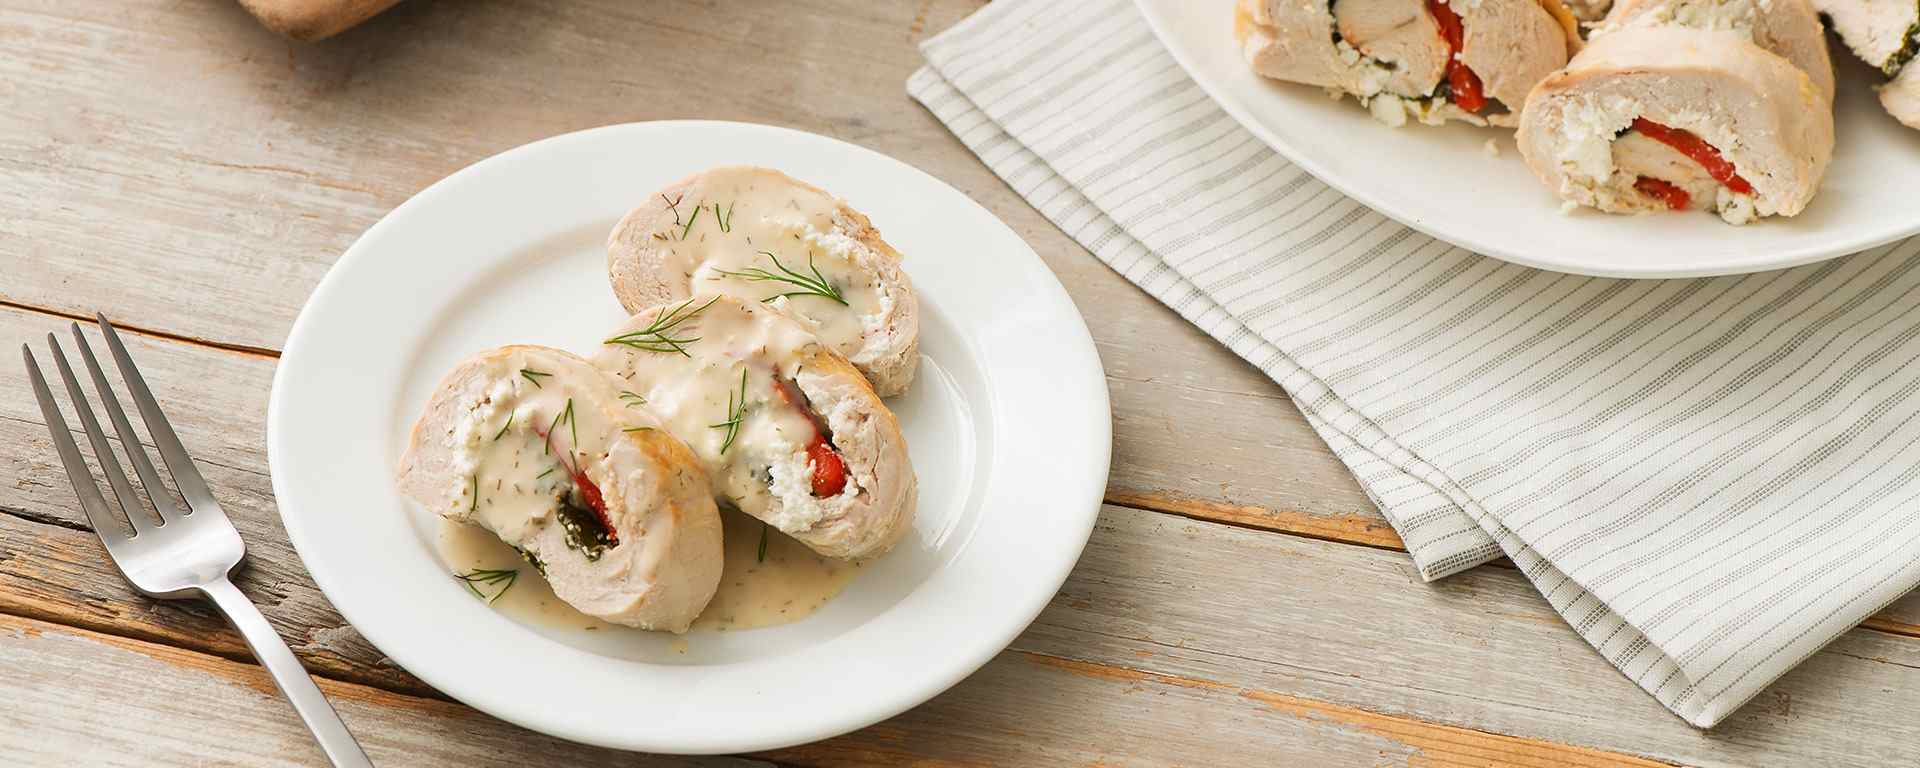 Photo of - Stuffed Chicken Breasts Poached in Lemon and Dill Butter